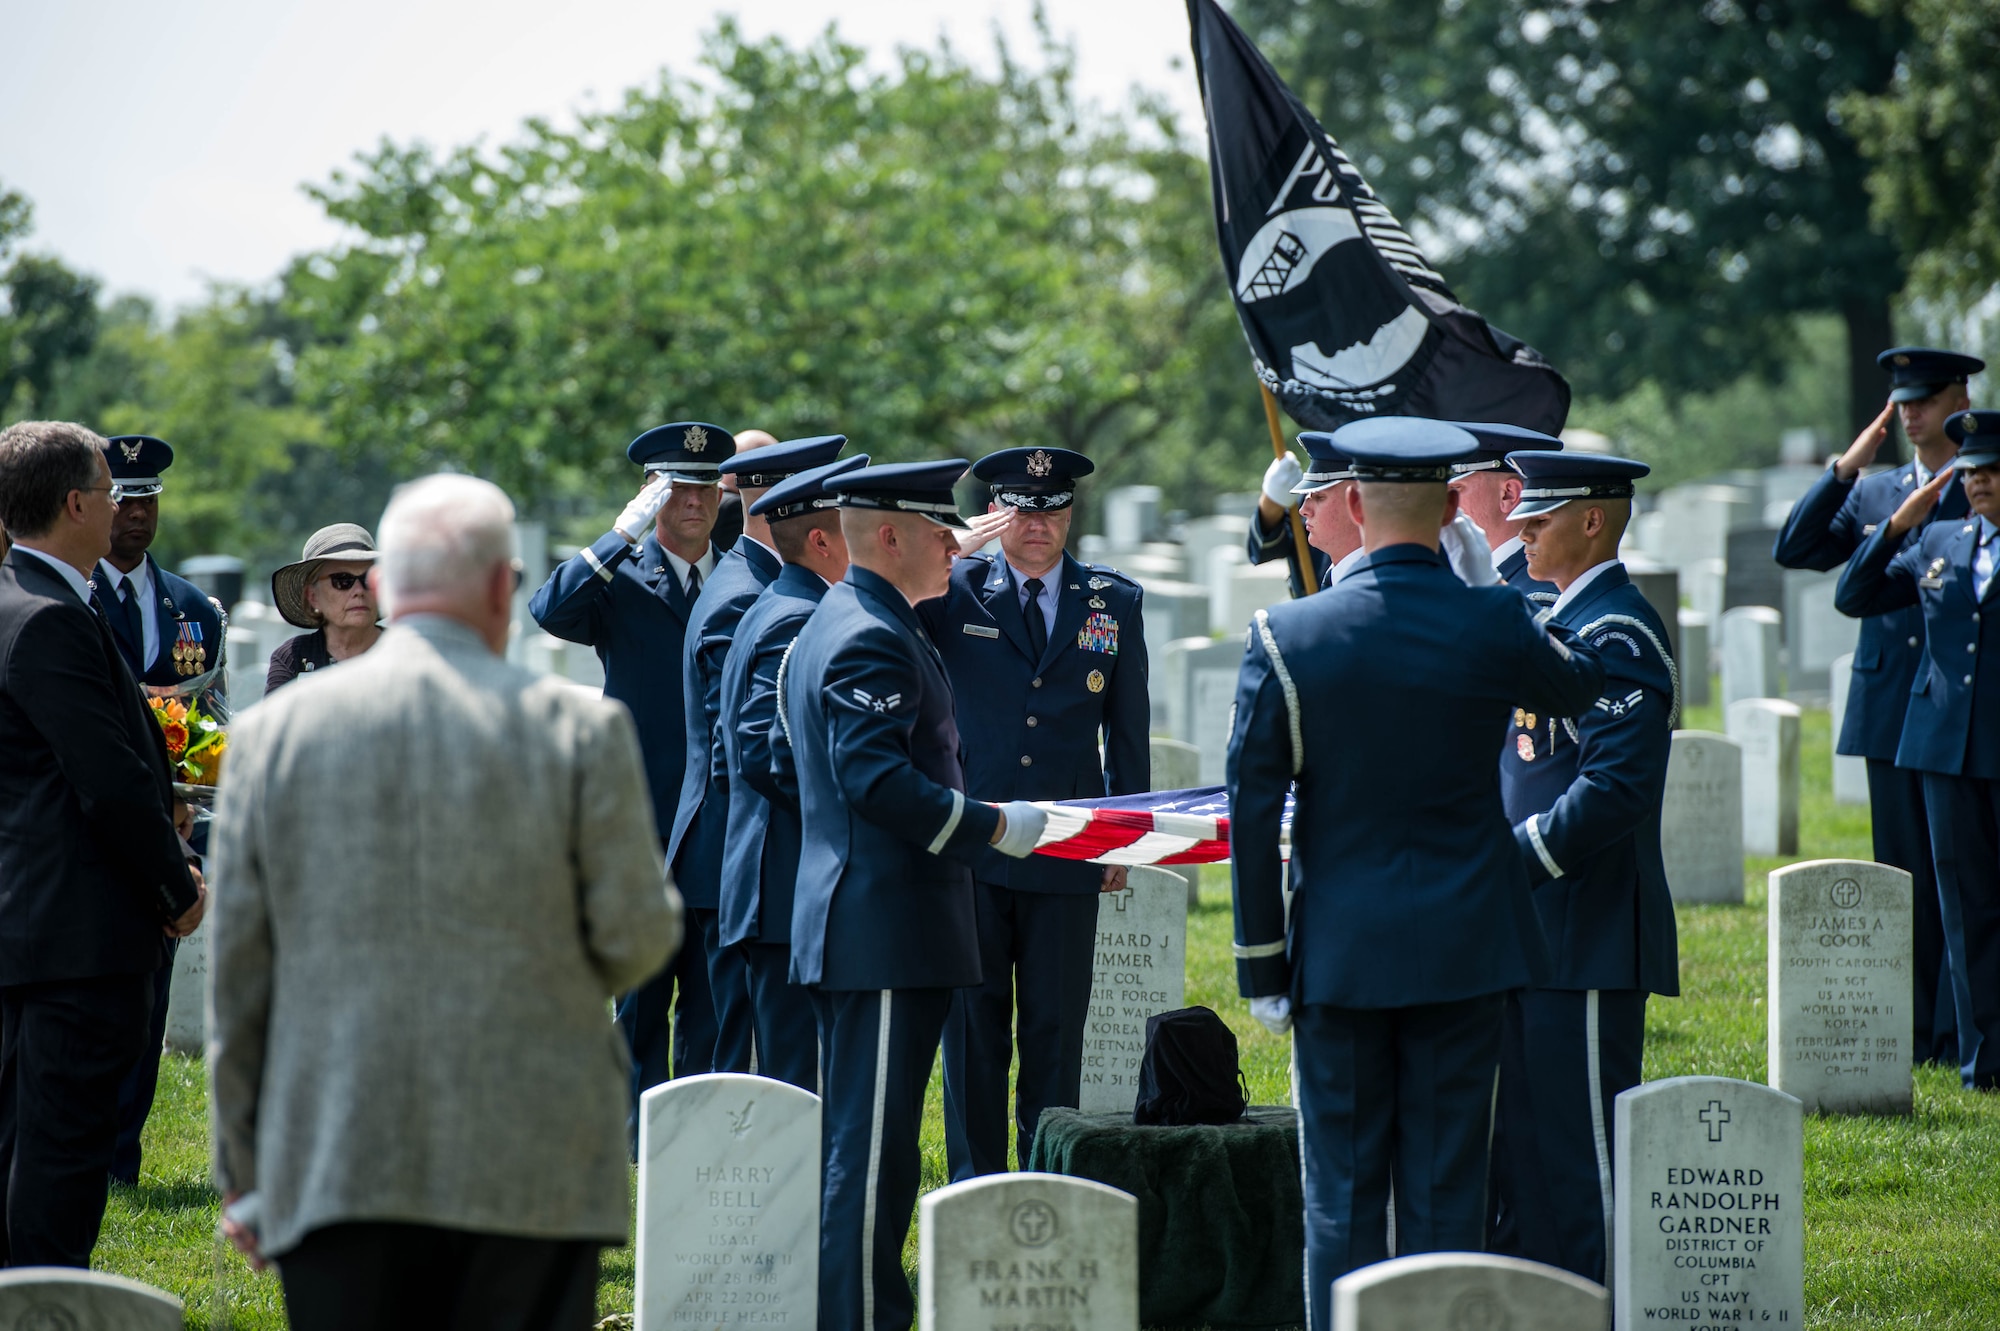 Air Force Ceremonial Guardsmen fire a volley during retired Air Force Col. Freeman Bruce Olmstead’s funeral at Arlington National Cemetery, Arlington, Va., July 27, 2017. For his actions as a Prisoner of War, Olmstead received Silver Star, Distinguished Flying Cross and Purple Heart. (U.S. Photo/Andy Morataya)